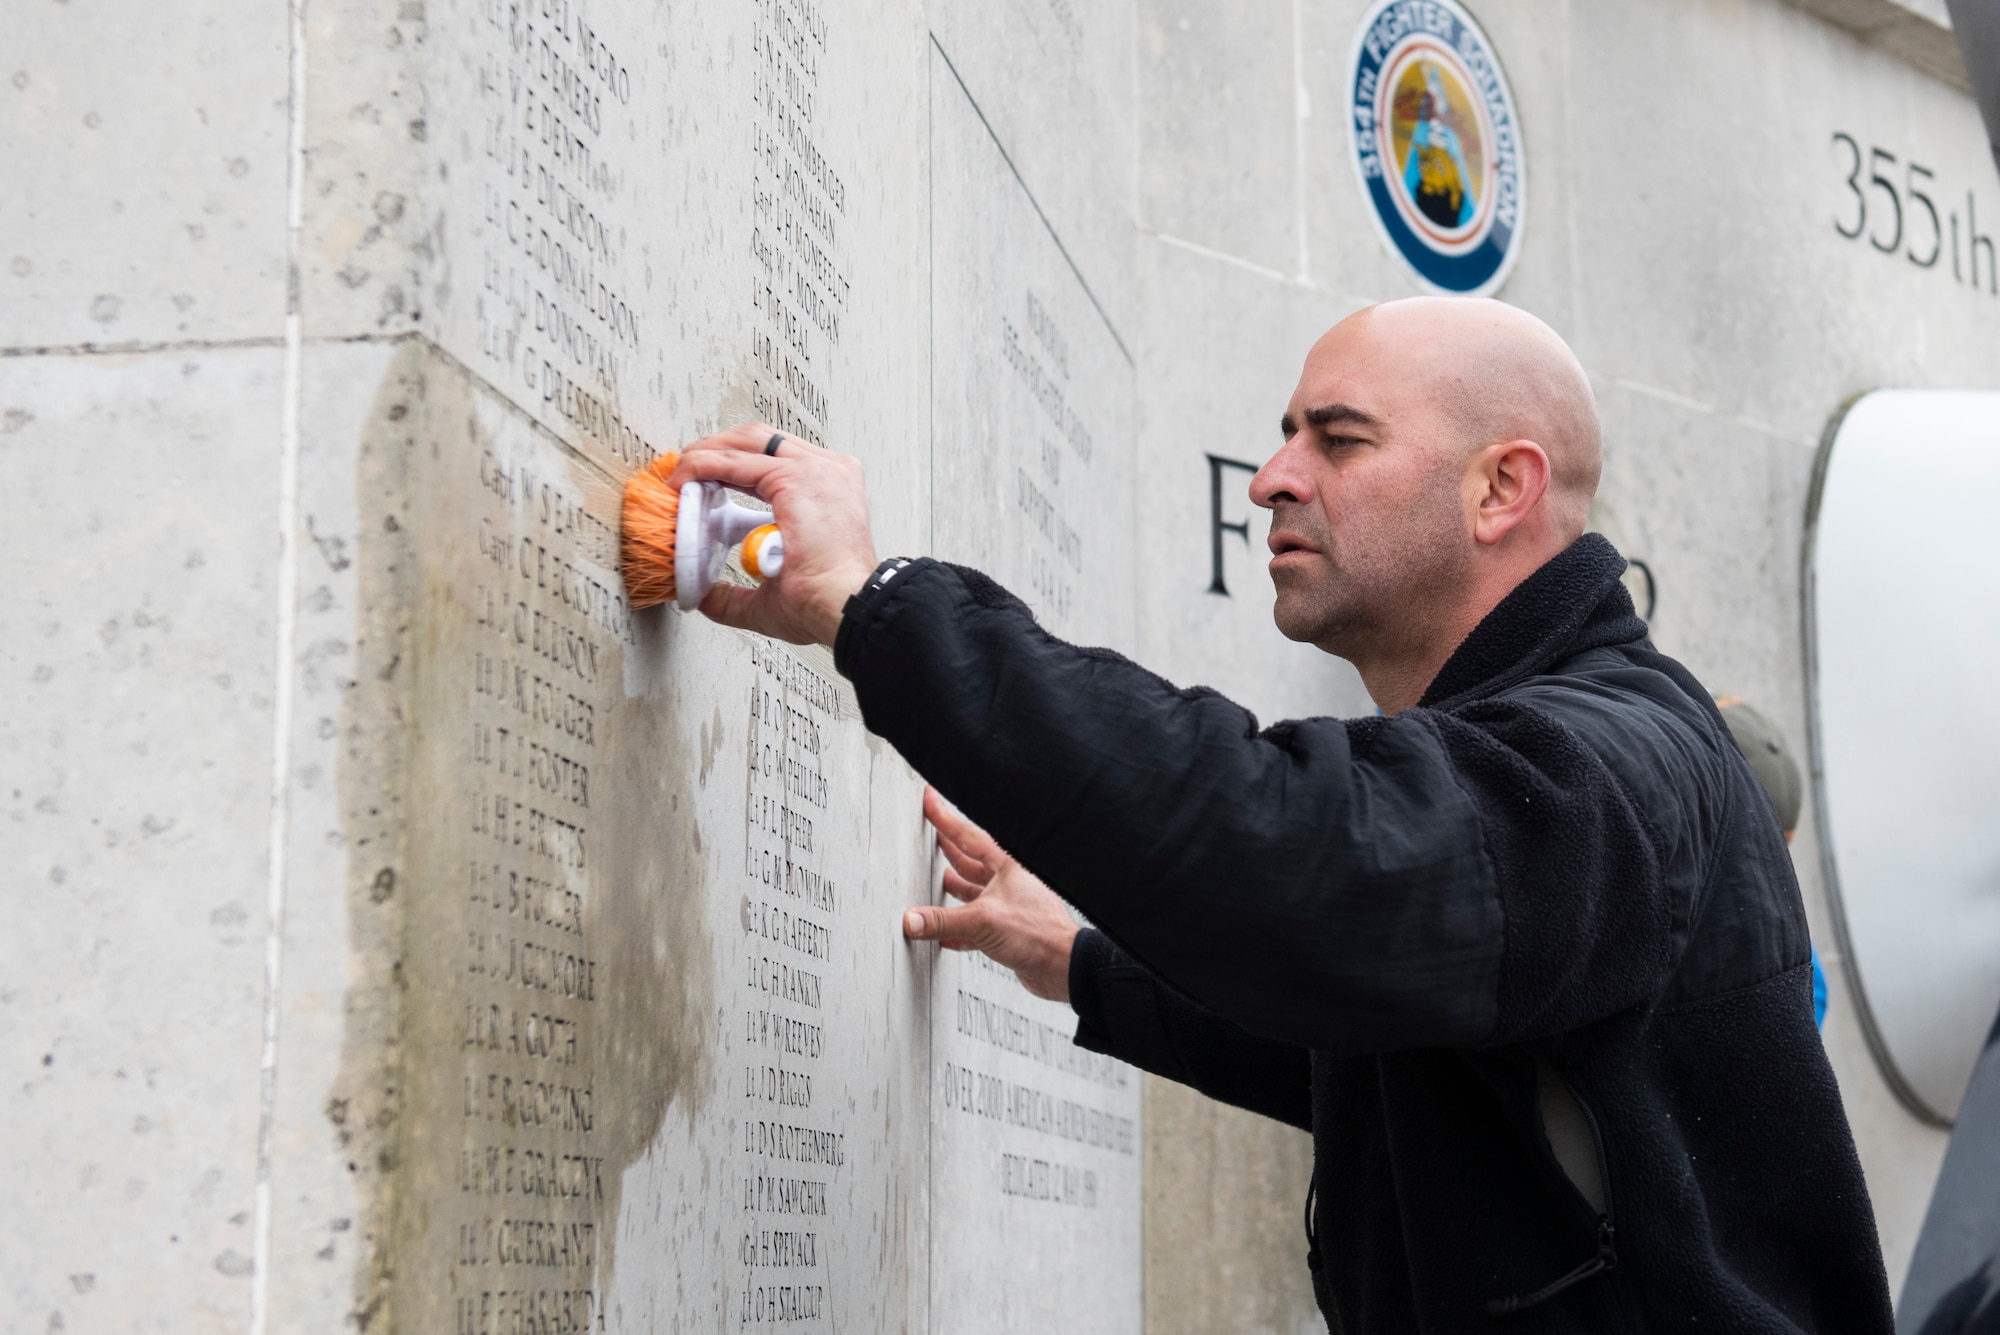 U.S. Air Force Tech. Sgt. Manuel III Minjarez, U.S. Africa Command Directorate for Intelligence at RAF Molesworth technician, scrubs the 355th Fighter Group Steeple Morden Memorial in Steeple Morden, England, during Operation TORCH-2020 memorial cleanup August 15, 2020. U.S. Africa Command Directorate for Intelligence at RAF Molesworth partnered with the American Battle Monuments Commission to host Operation TORCH-2020, where over 50 military members and their families, U.K. nationals and Boy Scout Troop #245, cleaned six WWII memorial sites to preserve American service member legacies and promote an appreciation of past American heroes among present-day USAFRICOM workforce and families. (U.S. Air Force Photo by Airman 1st Class Jennifer Zima)